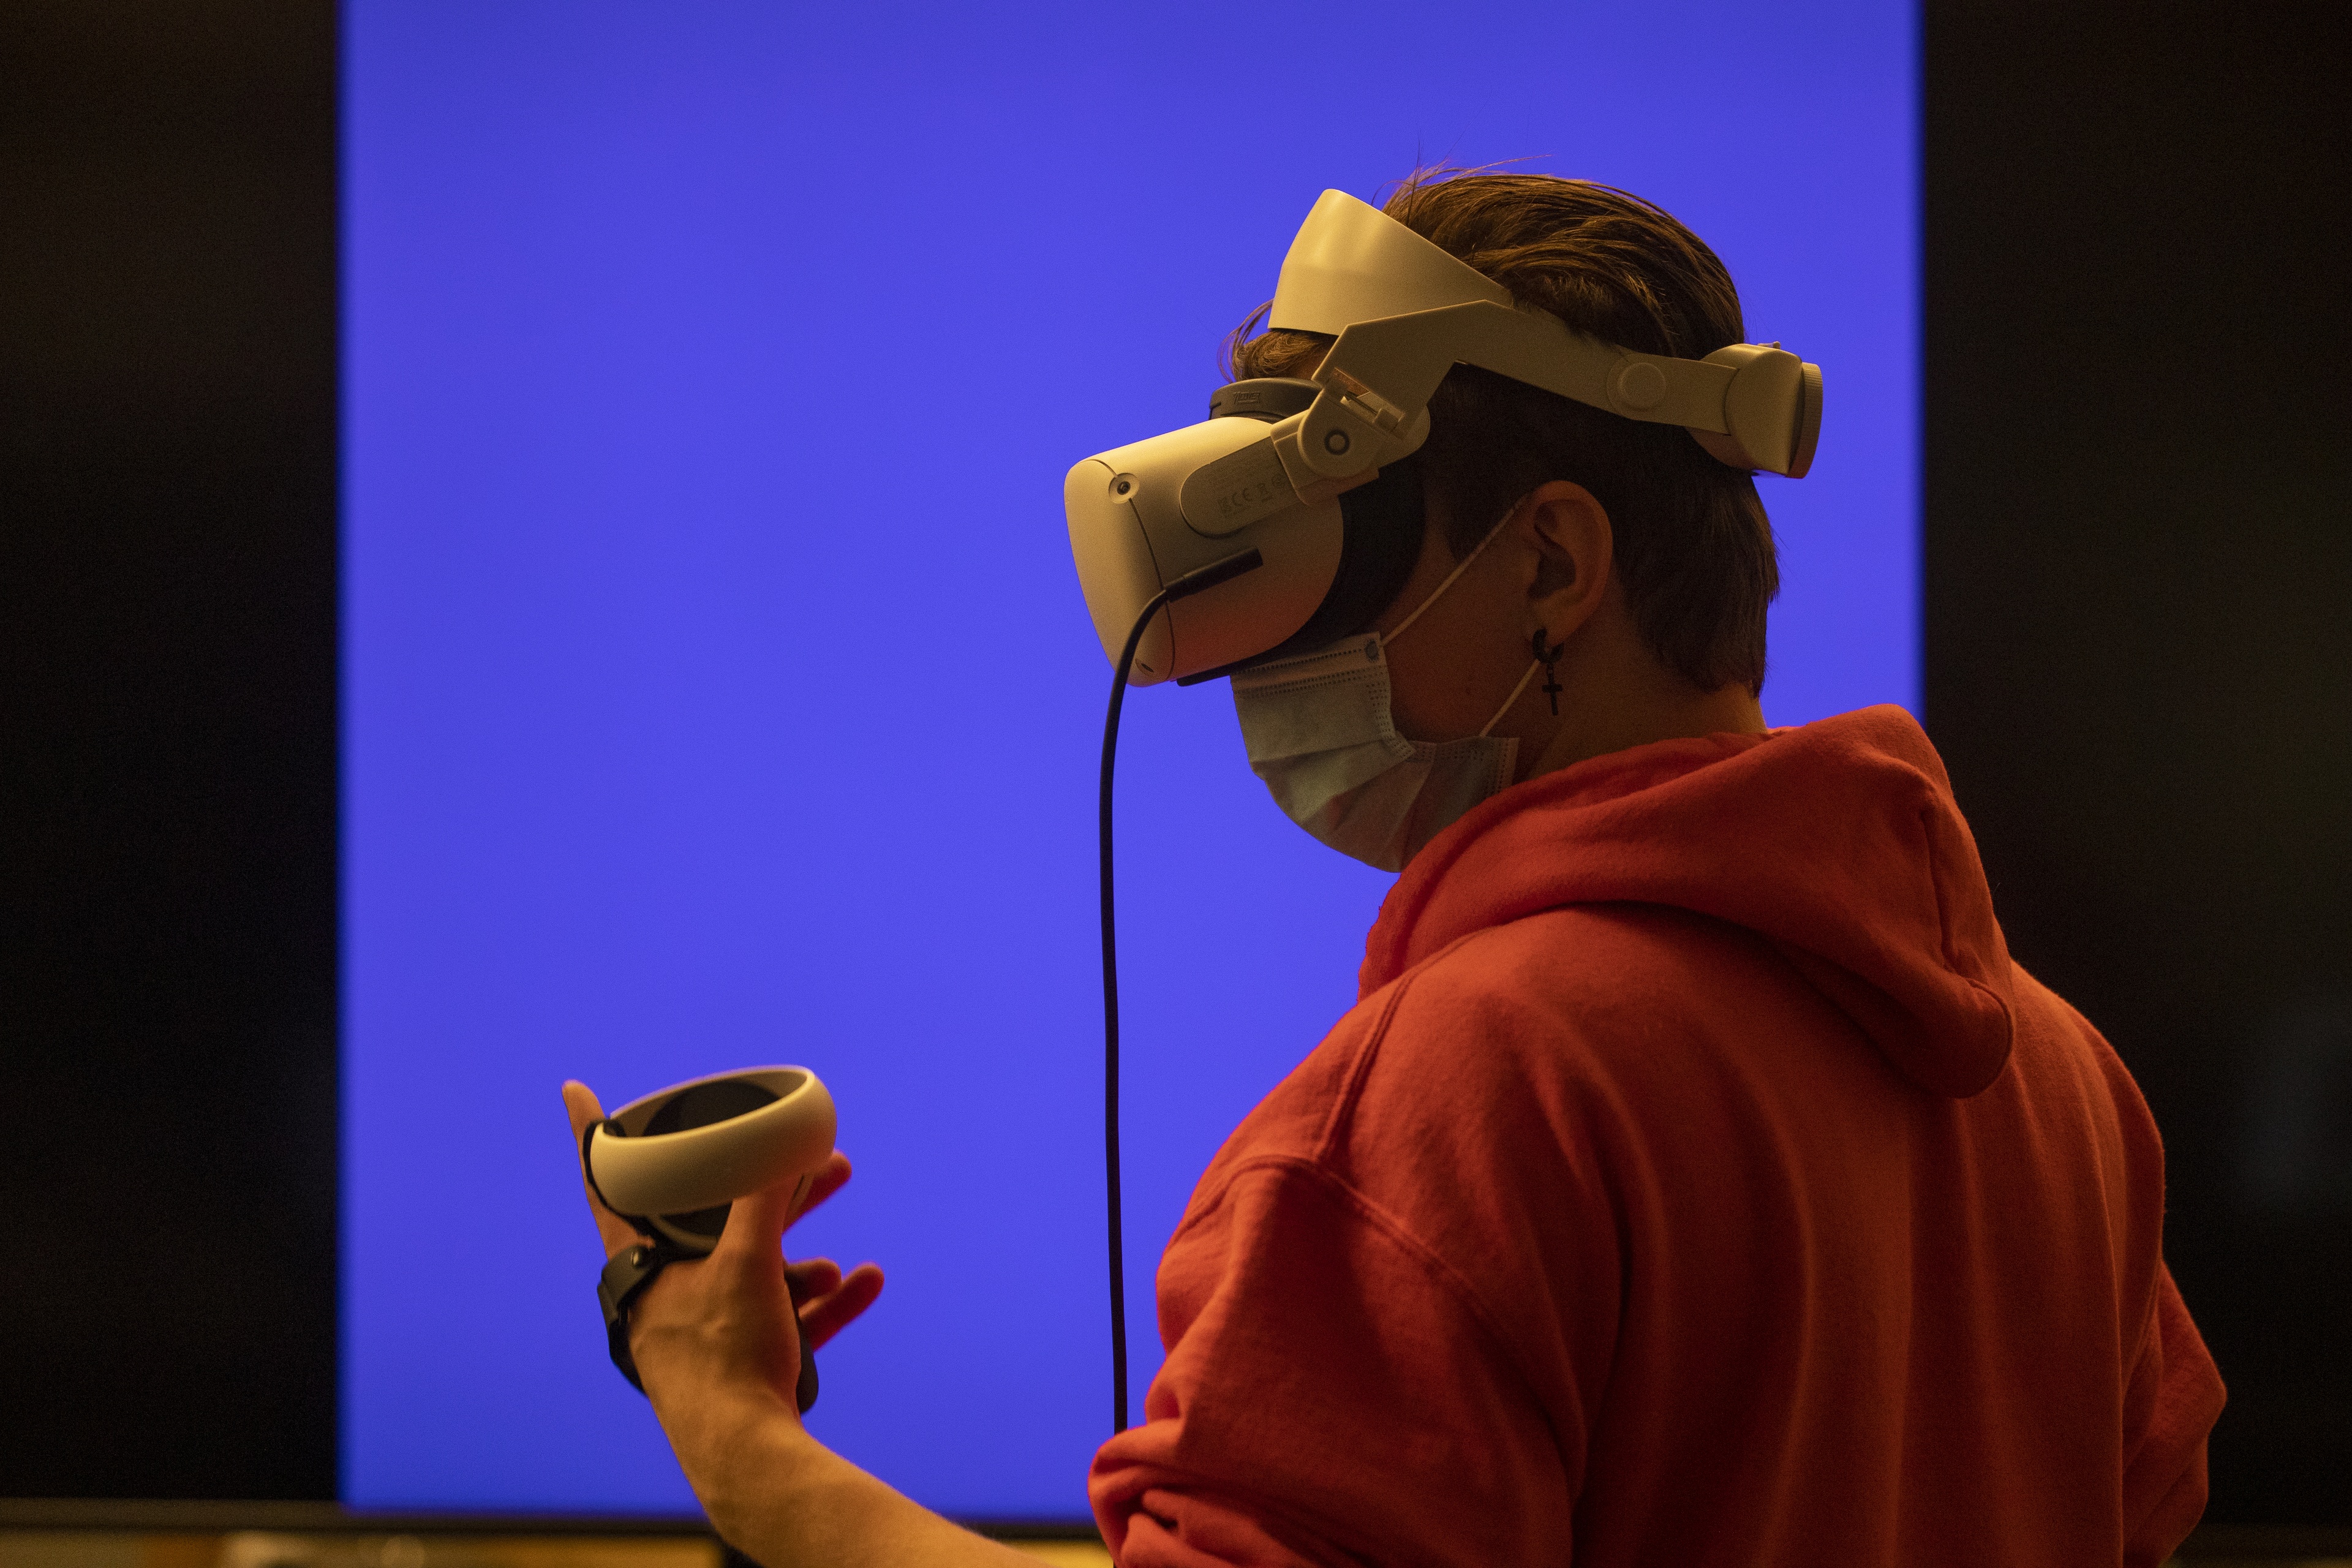 Student demonstrates the use of virtual reality equipment in a classroom in the BGSU Fine Arts Center